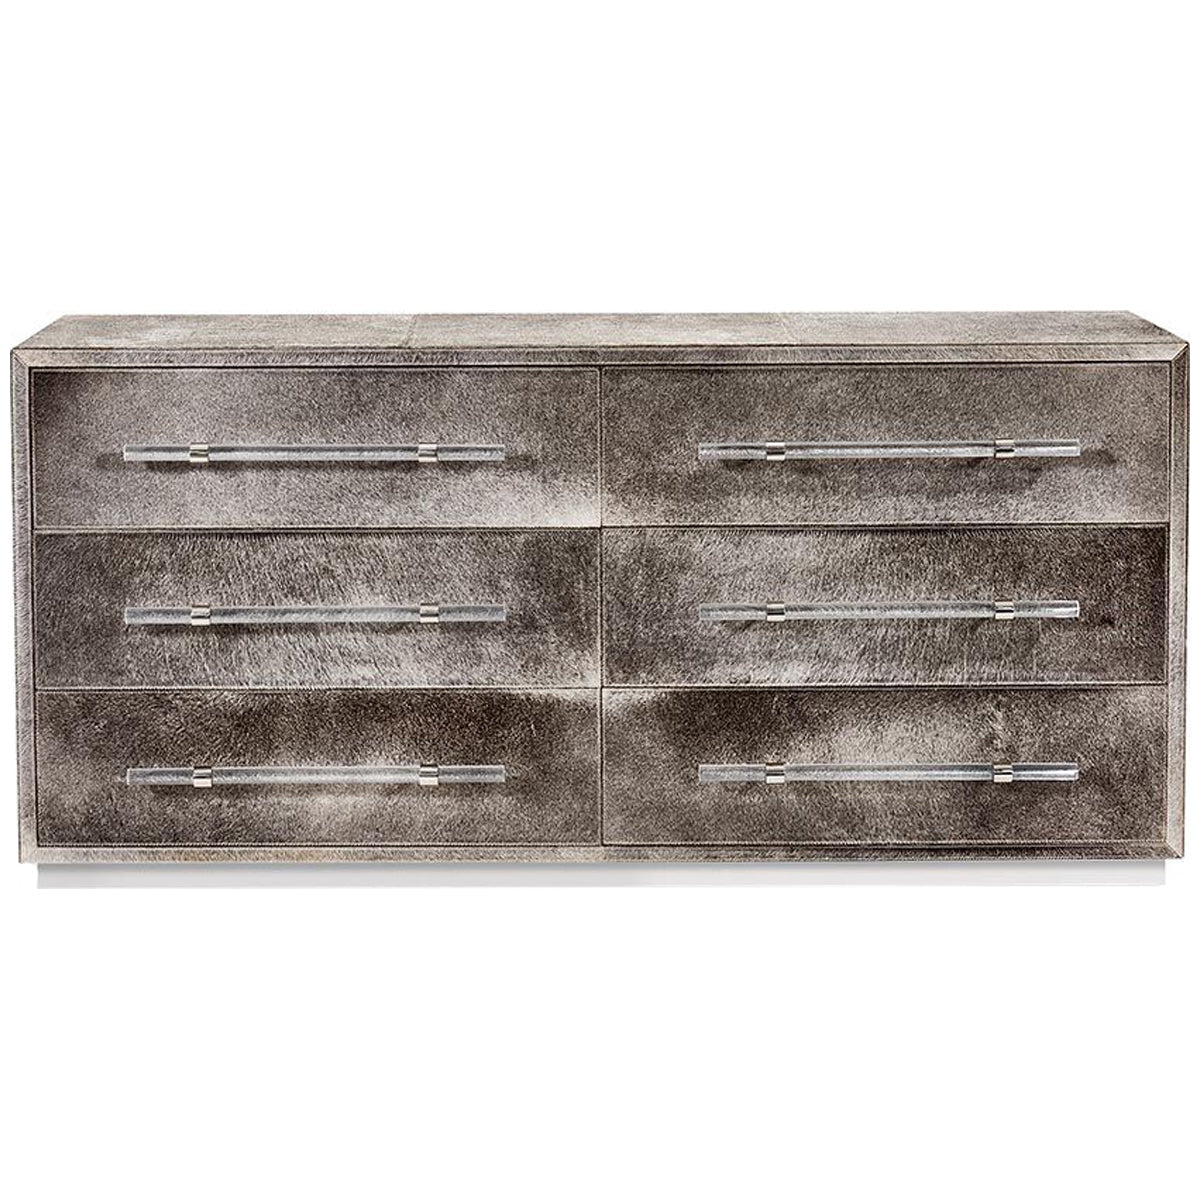 Interlude Home Cassian 6-Drawer Chest